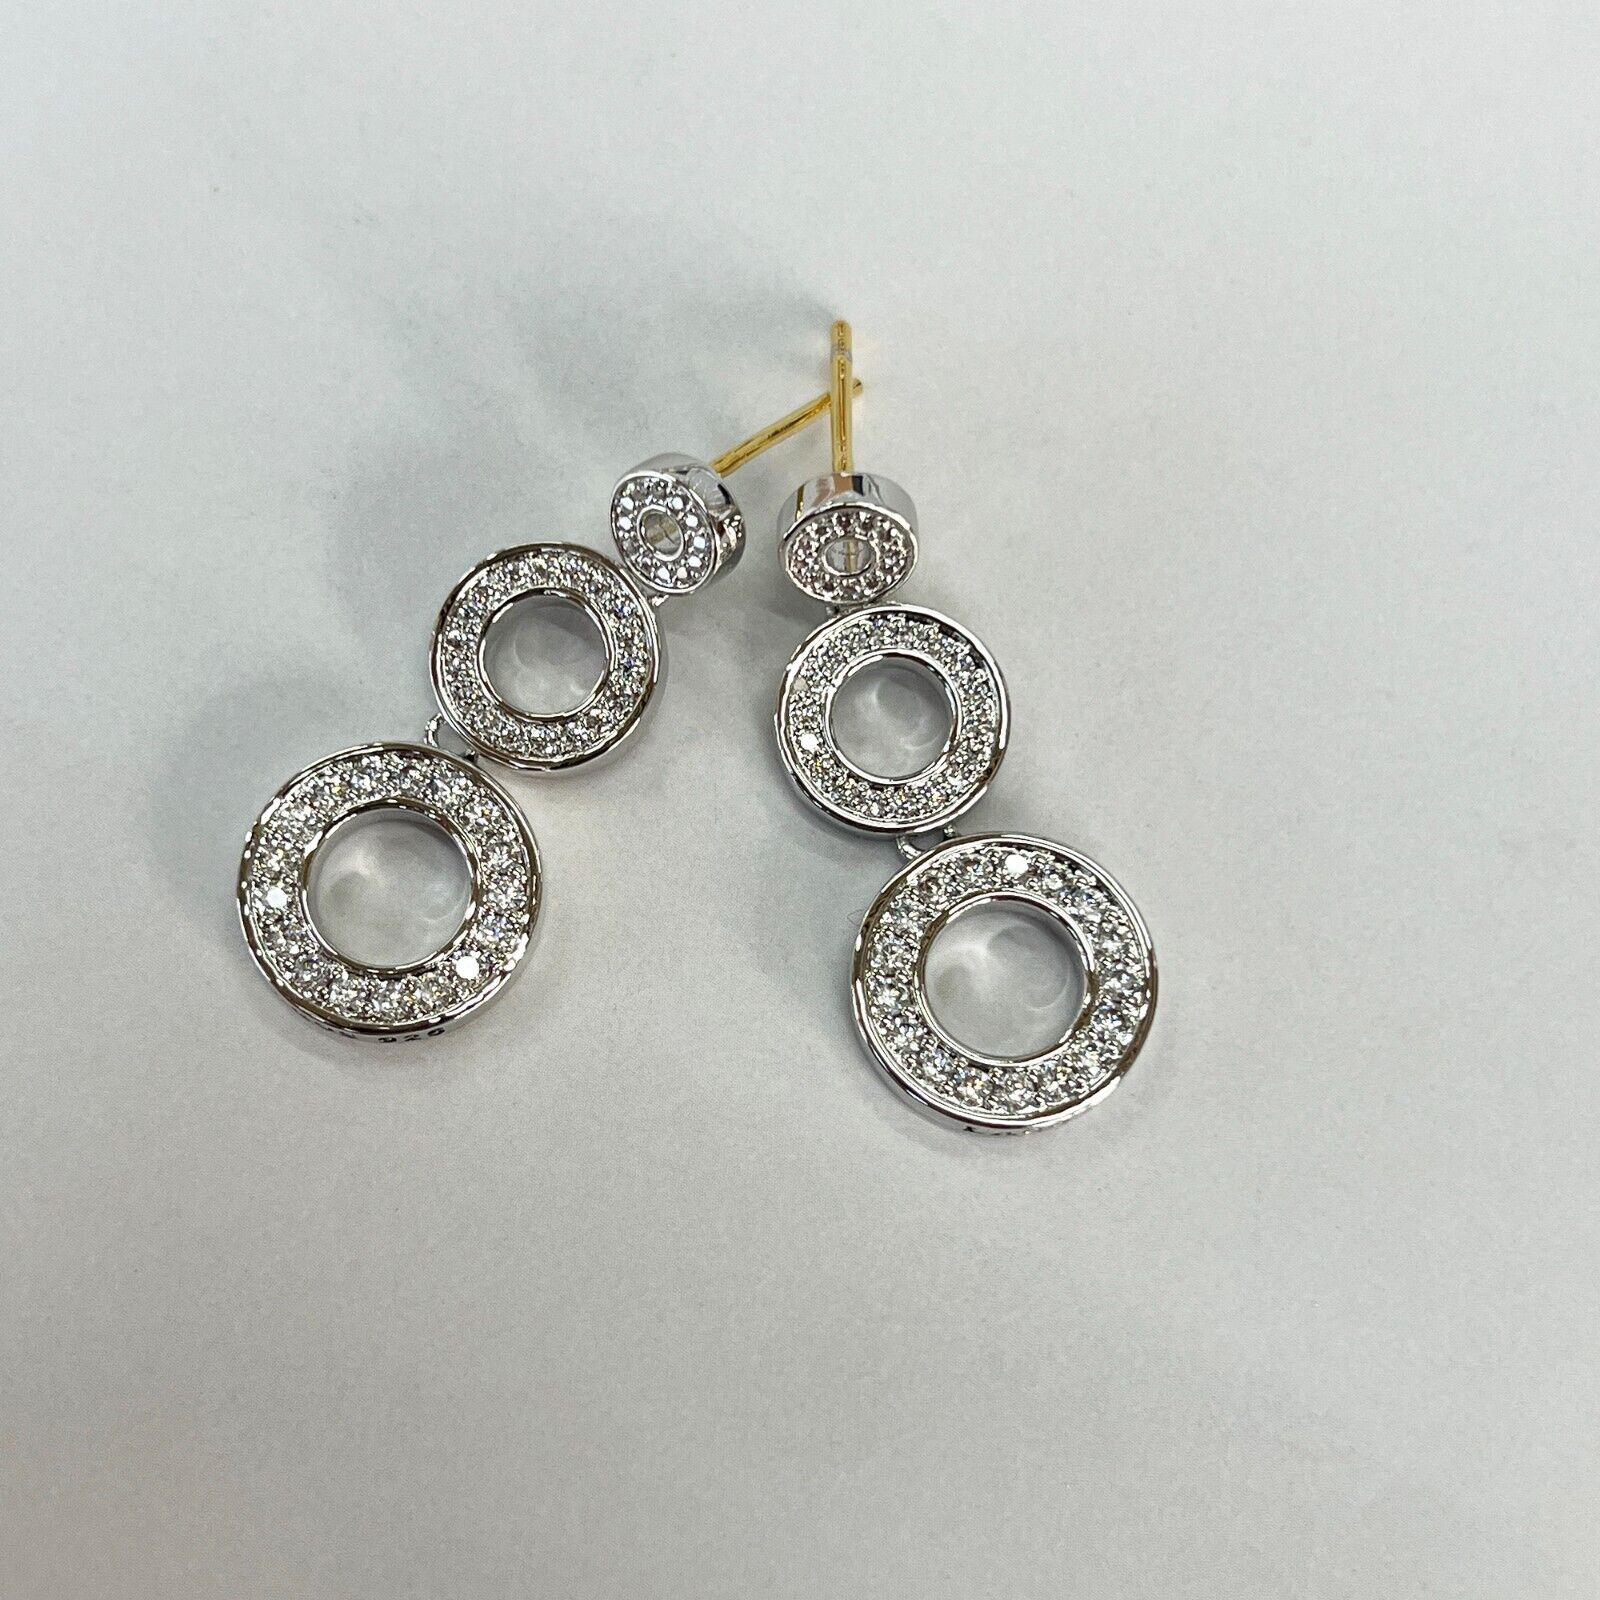 NEW Caviar Spark Collection Sterling Silver Triple Circle Drop Earrings  LAGOS